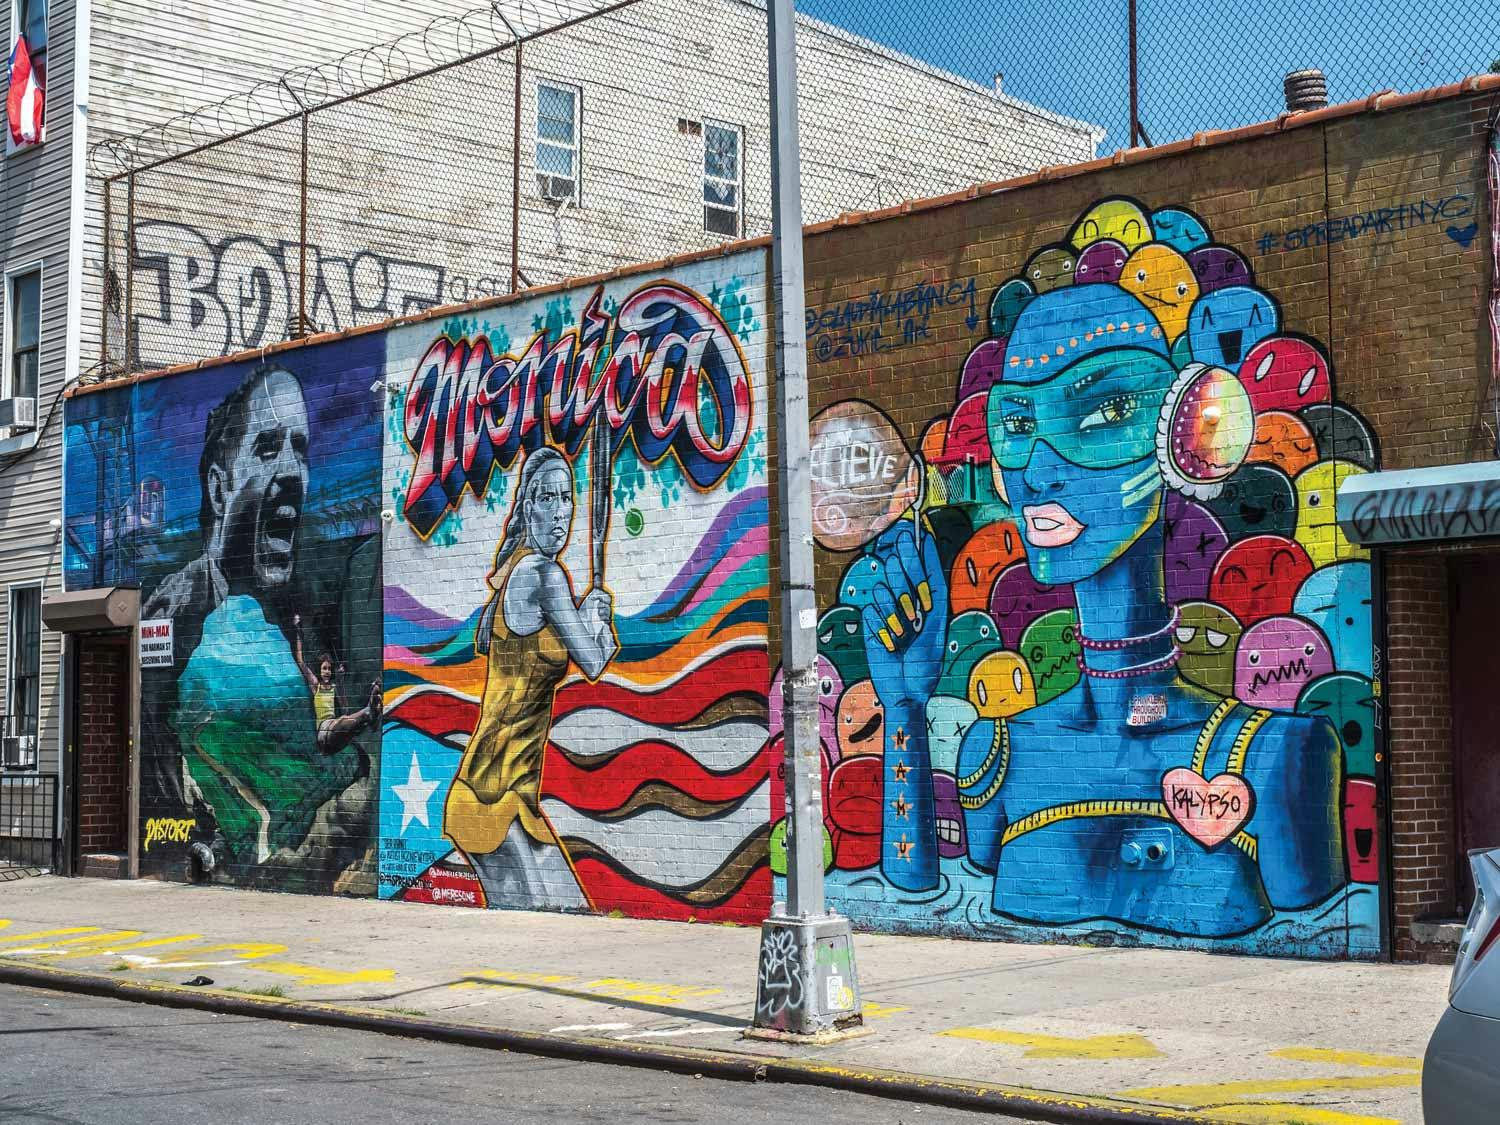 Murals of a man shouting, a tennis player, and a blue-skinned woman with colourful hair and goggles in Bushwick, Brooklyn.